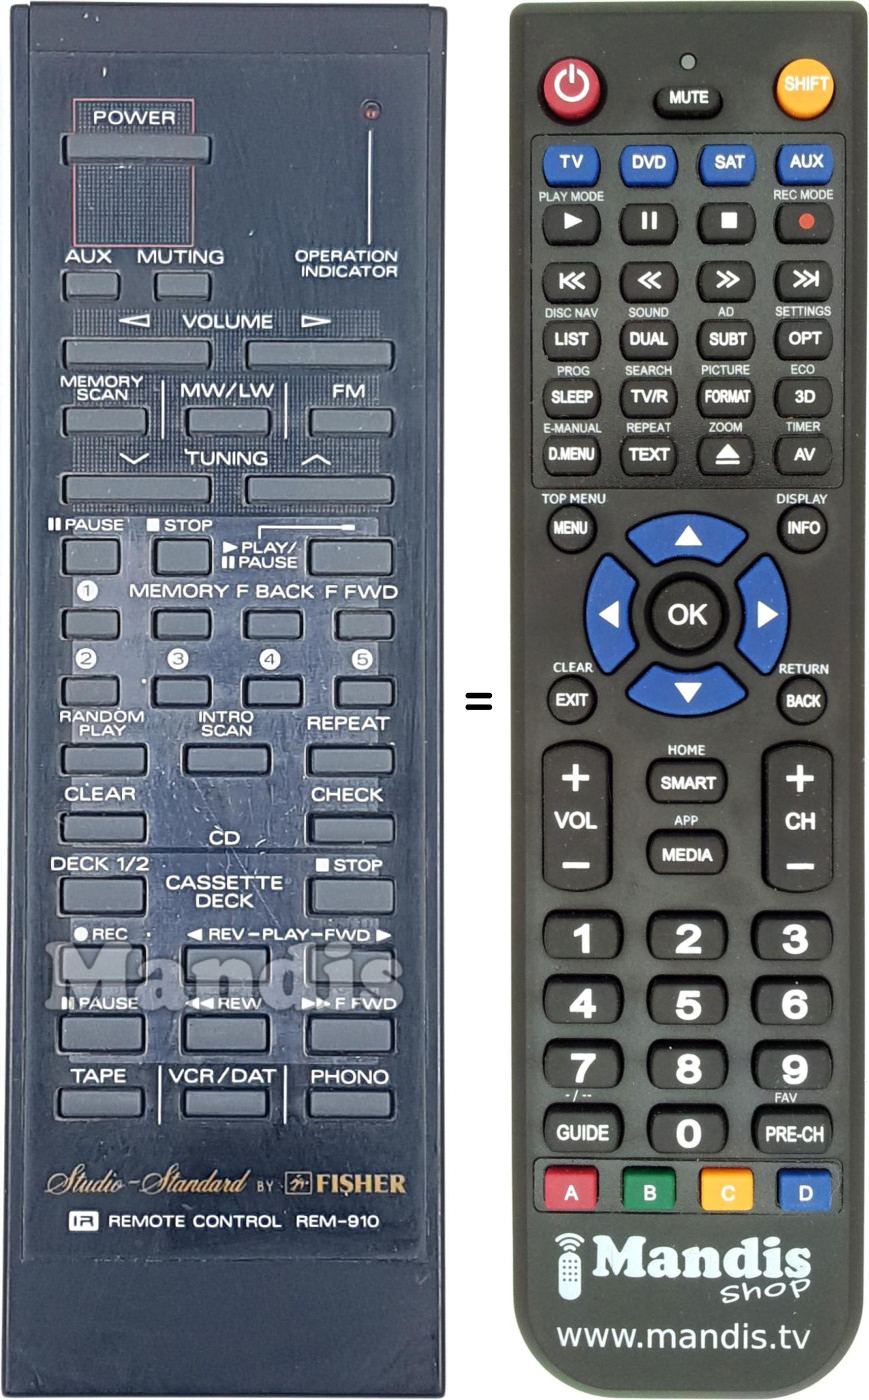 Replacement remote control REM-910